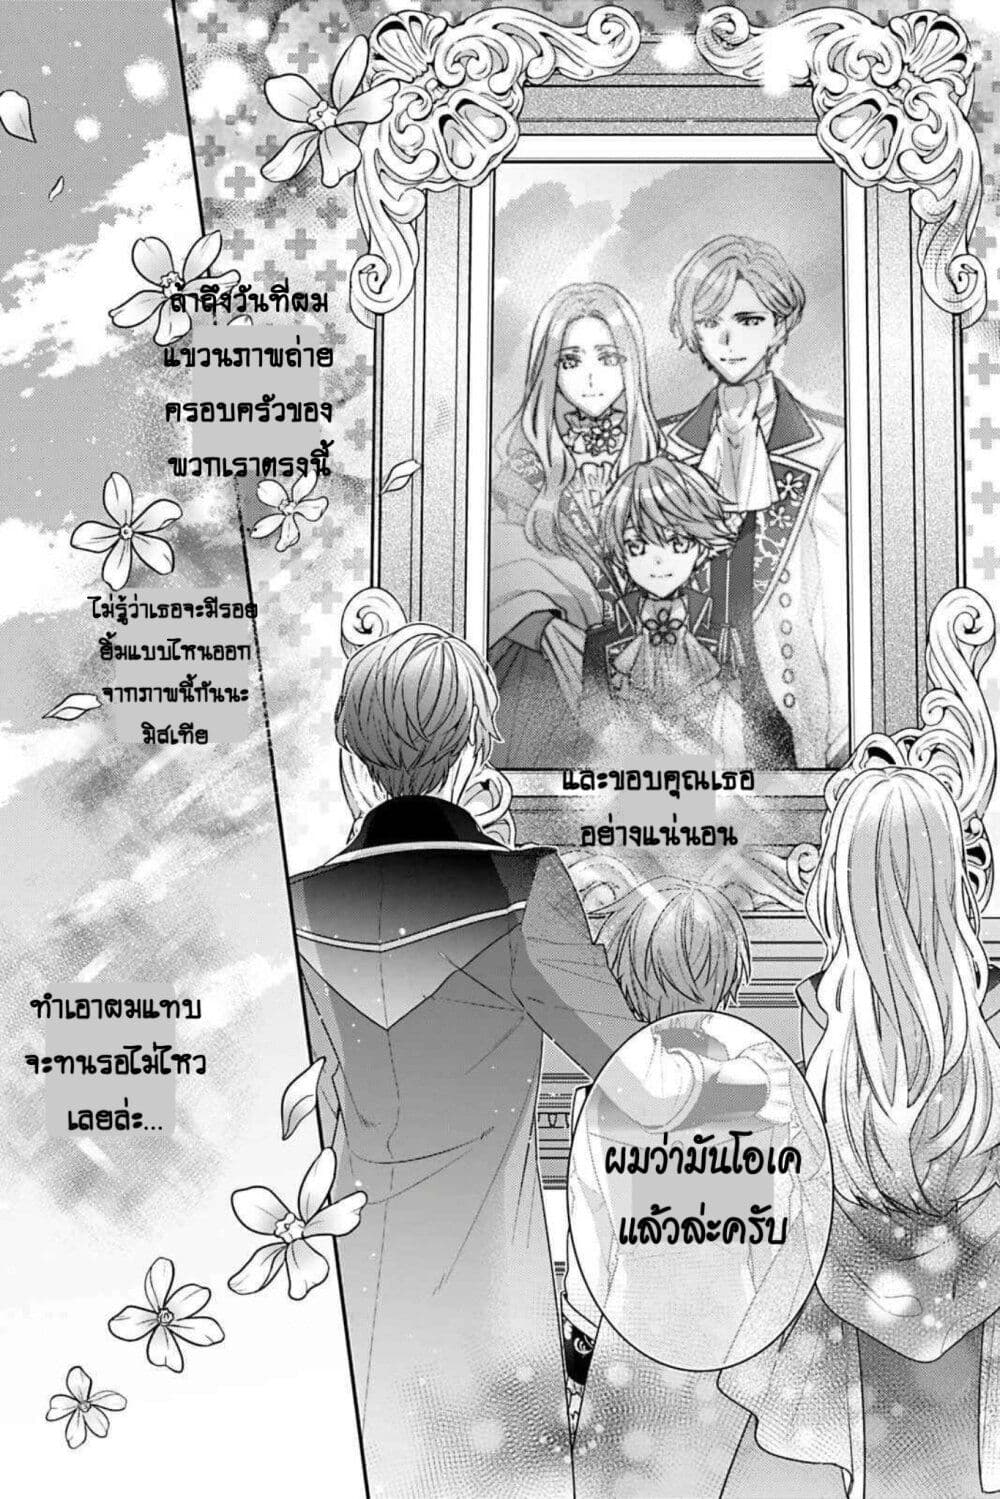 I Was Reincarnated as the Villainess in an Otome Game but the Boys Love Me Anyway! เกิดใหม่เป็นนางร้าย แต่เป้าหมายการจีบสุดจะไม่ปกติ !! 2-2